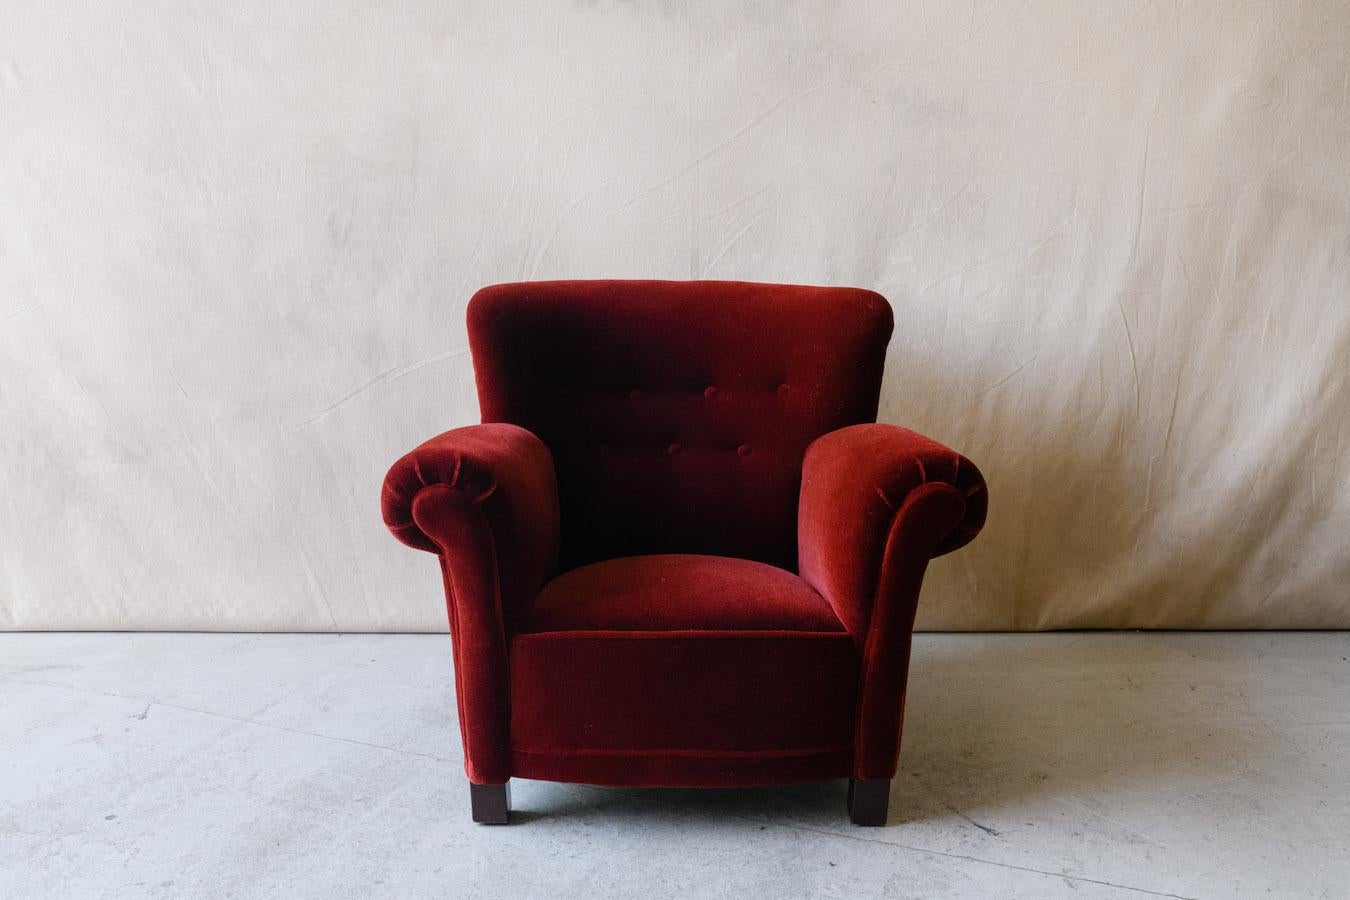 Mid 19th Century Velvet Lounge Chair From Denmark, Circa 1950.  Nice comfortable model upholstered in very soft velvet-mohair fabric.  Excellent condition.  

We don't have the time to write an extensive description on each of our pieces. We prefer